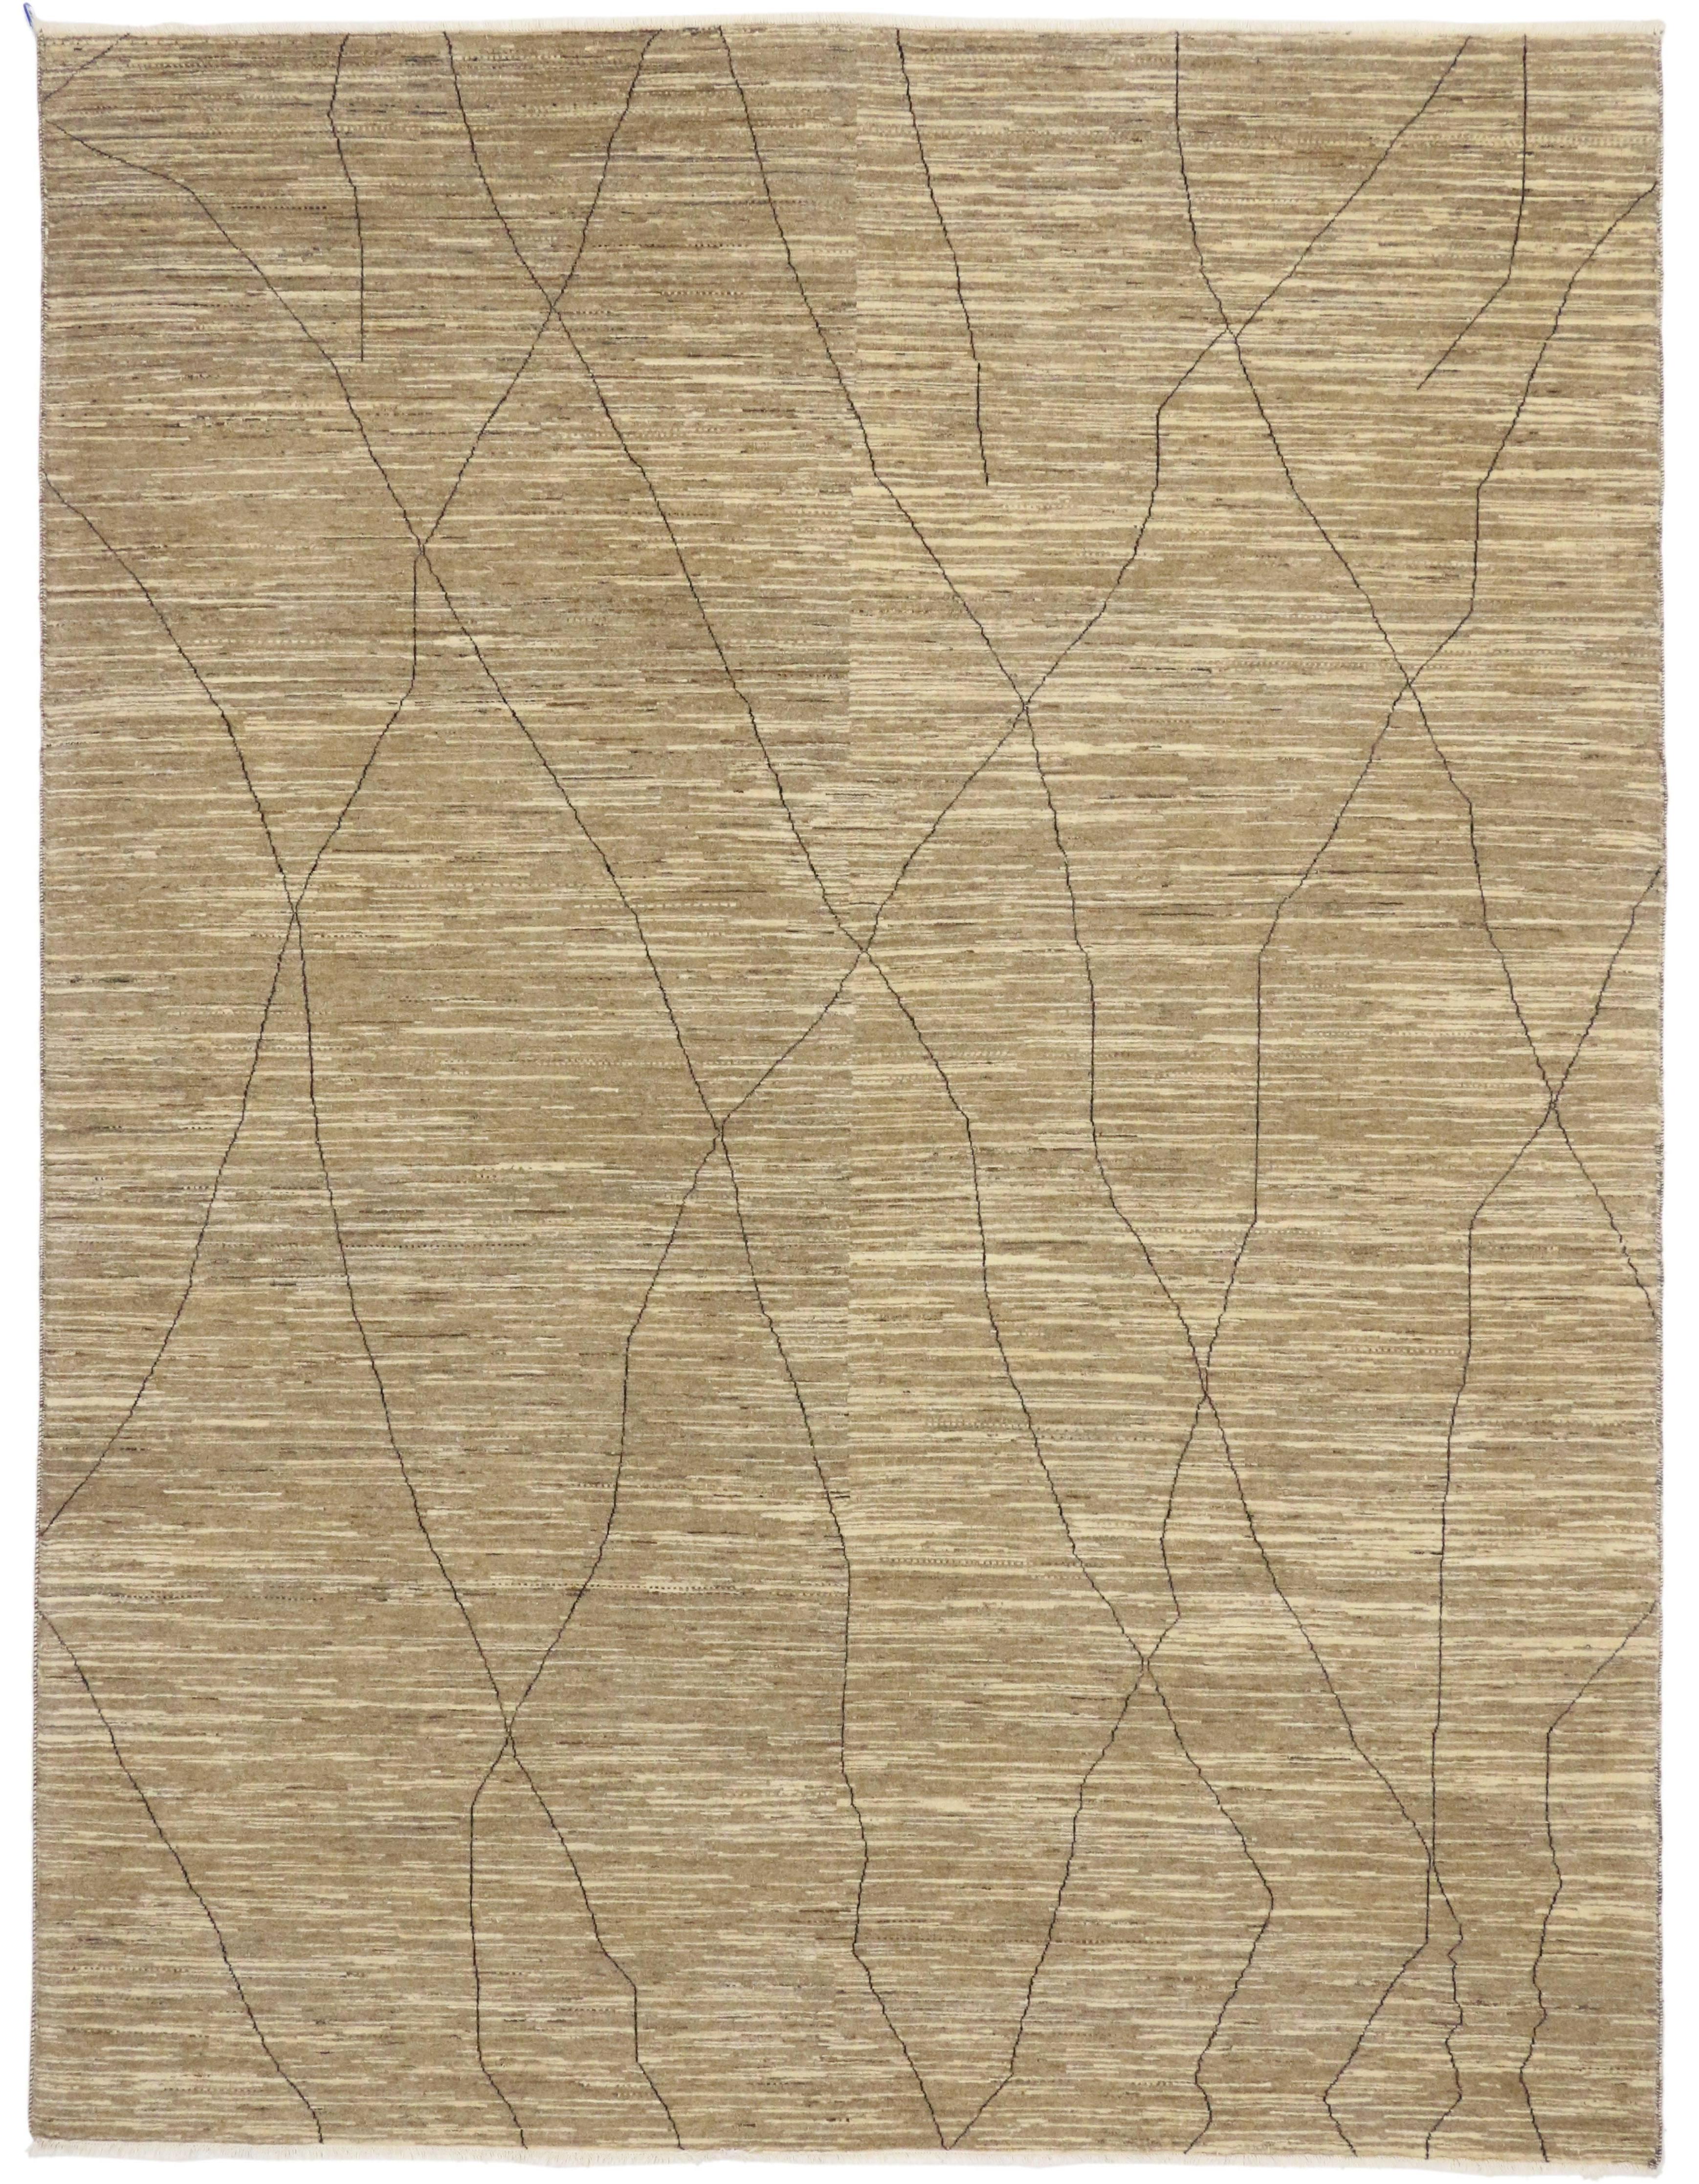 80257 Contemporary Moroccan Area Rug with Modern Design, Warm Neutral Earth Tones 07'11 x 10'05. A fine example of minimalism, this contemporary brown Moroccan area rug embodies the modern concept of less is more. The simplistic style and